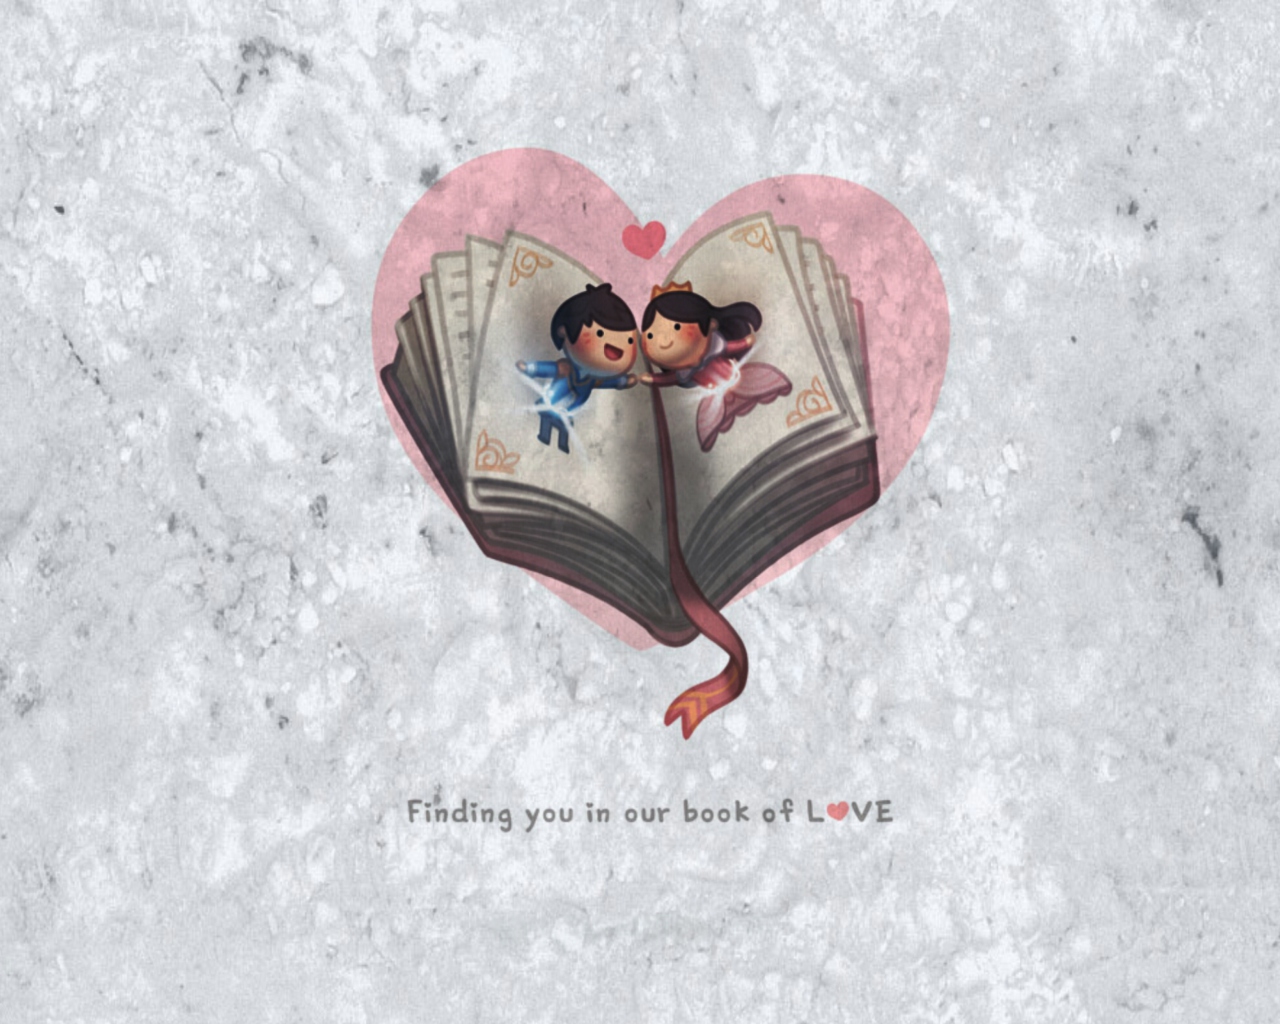 Love Is Finding You In Our Book Of Love wallpaper 1280x1024